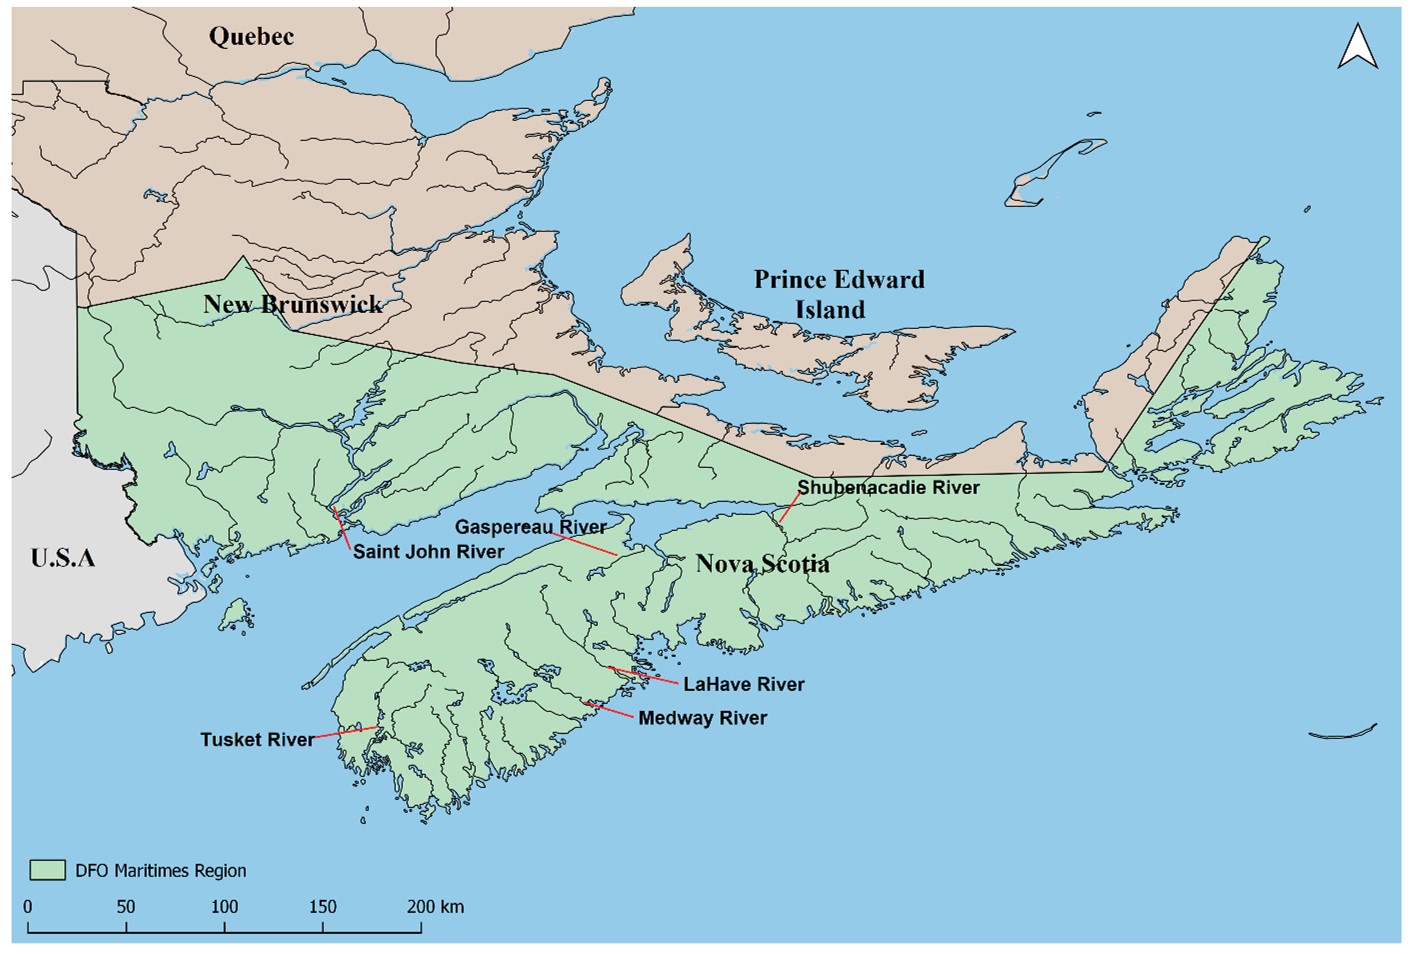 Map displaying rivers with major gaspereau fisheries in the Maritimes Region